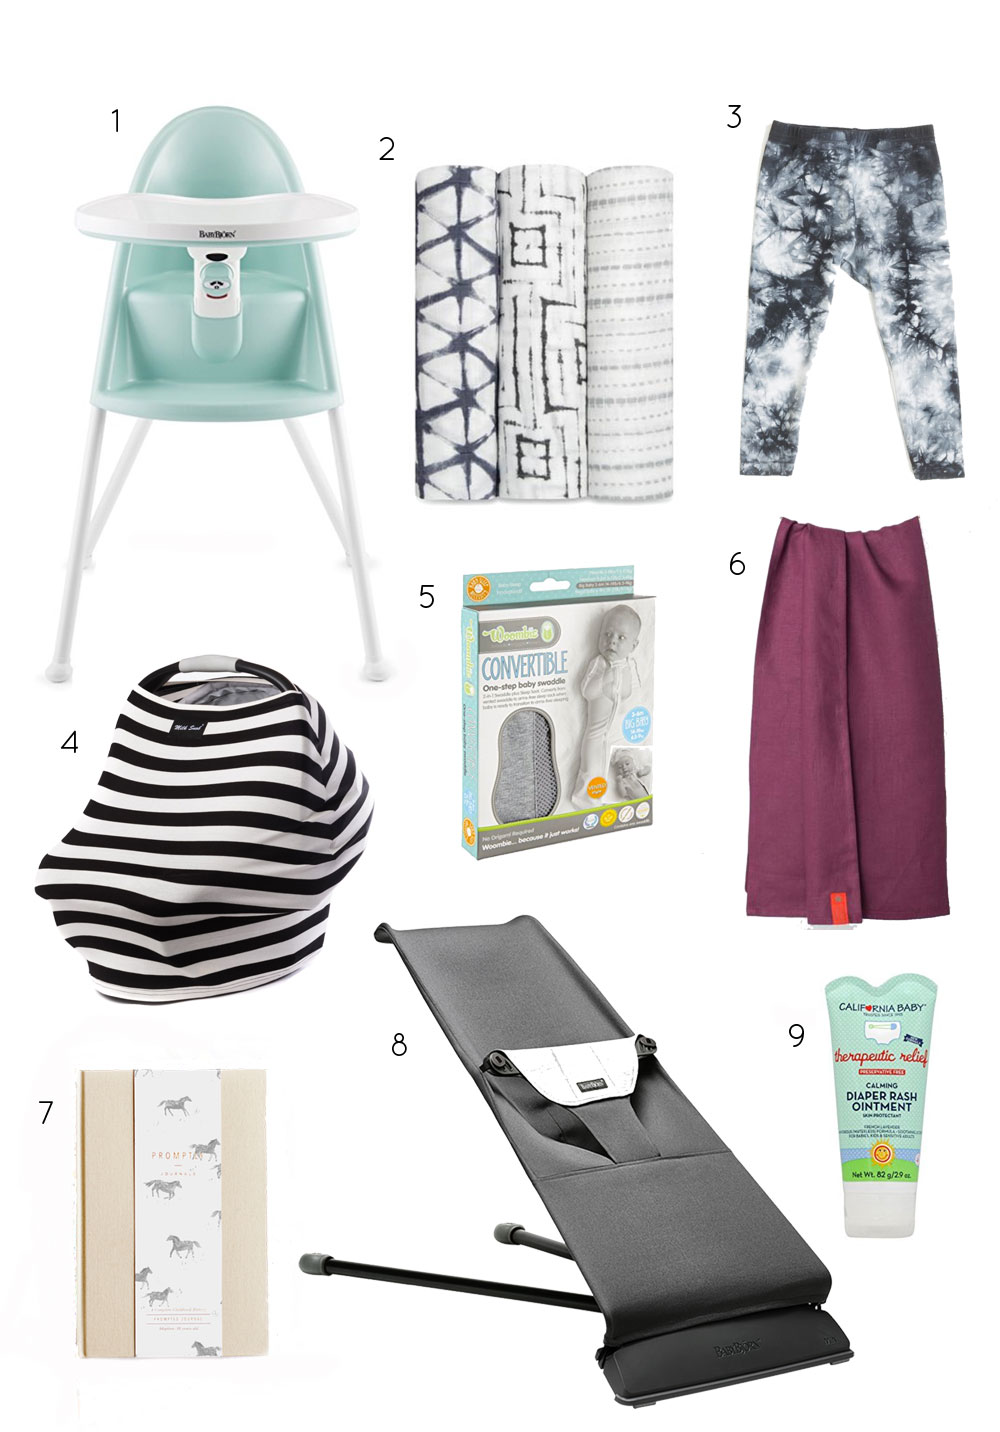 Best-Baby-Products-to-buy-for-an-expecting-mom